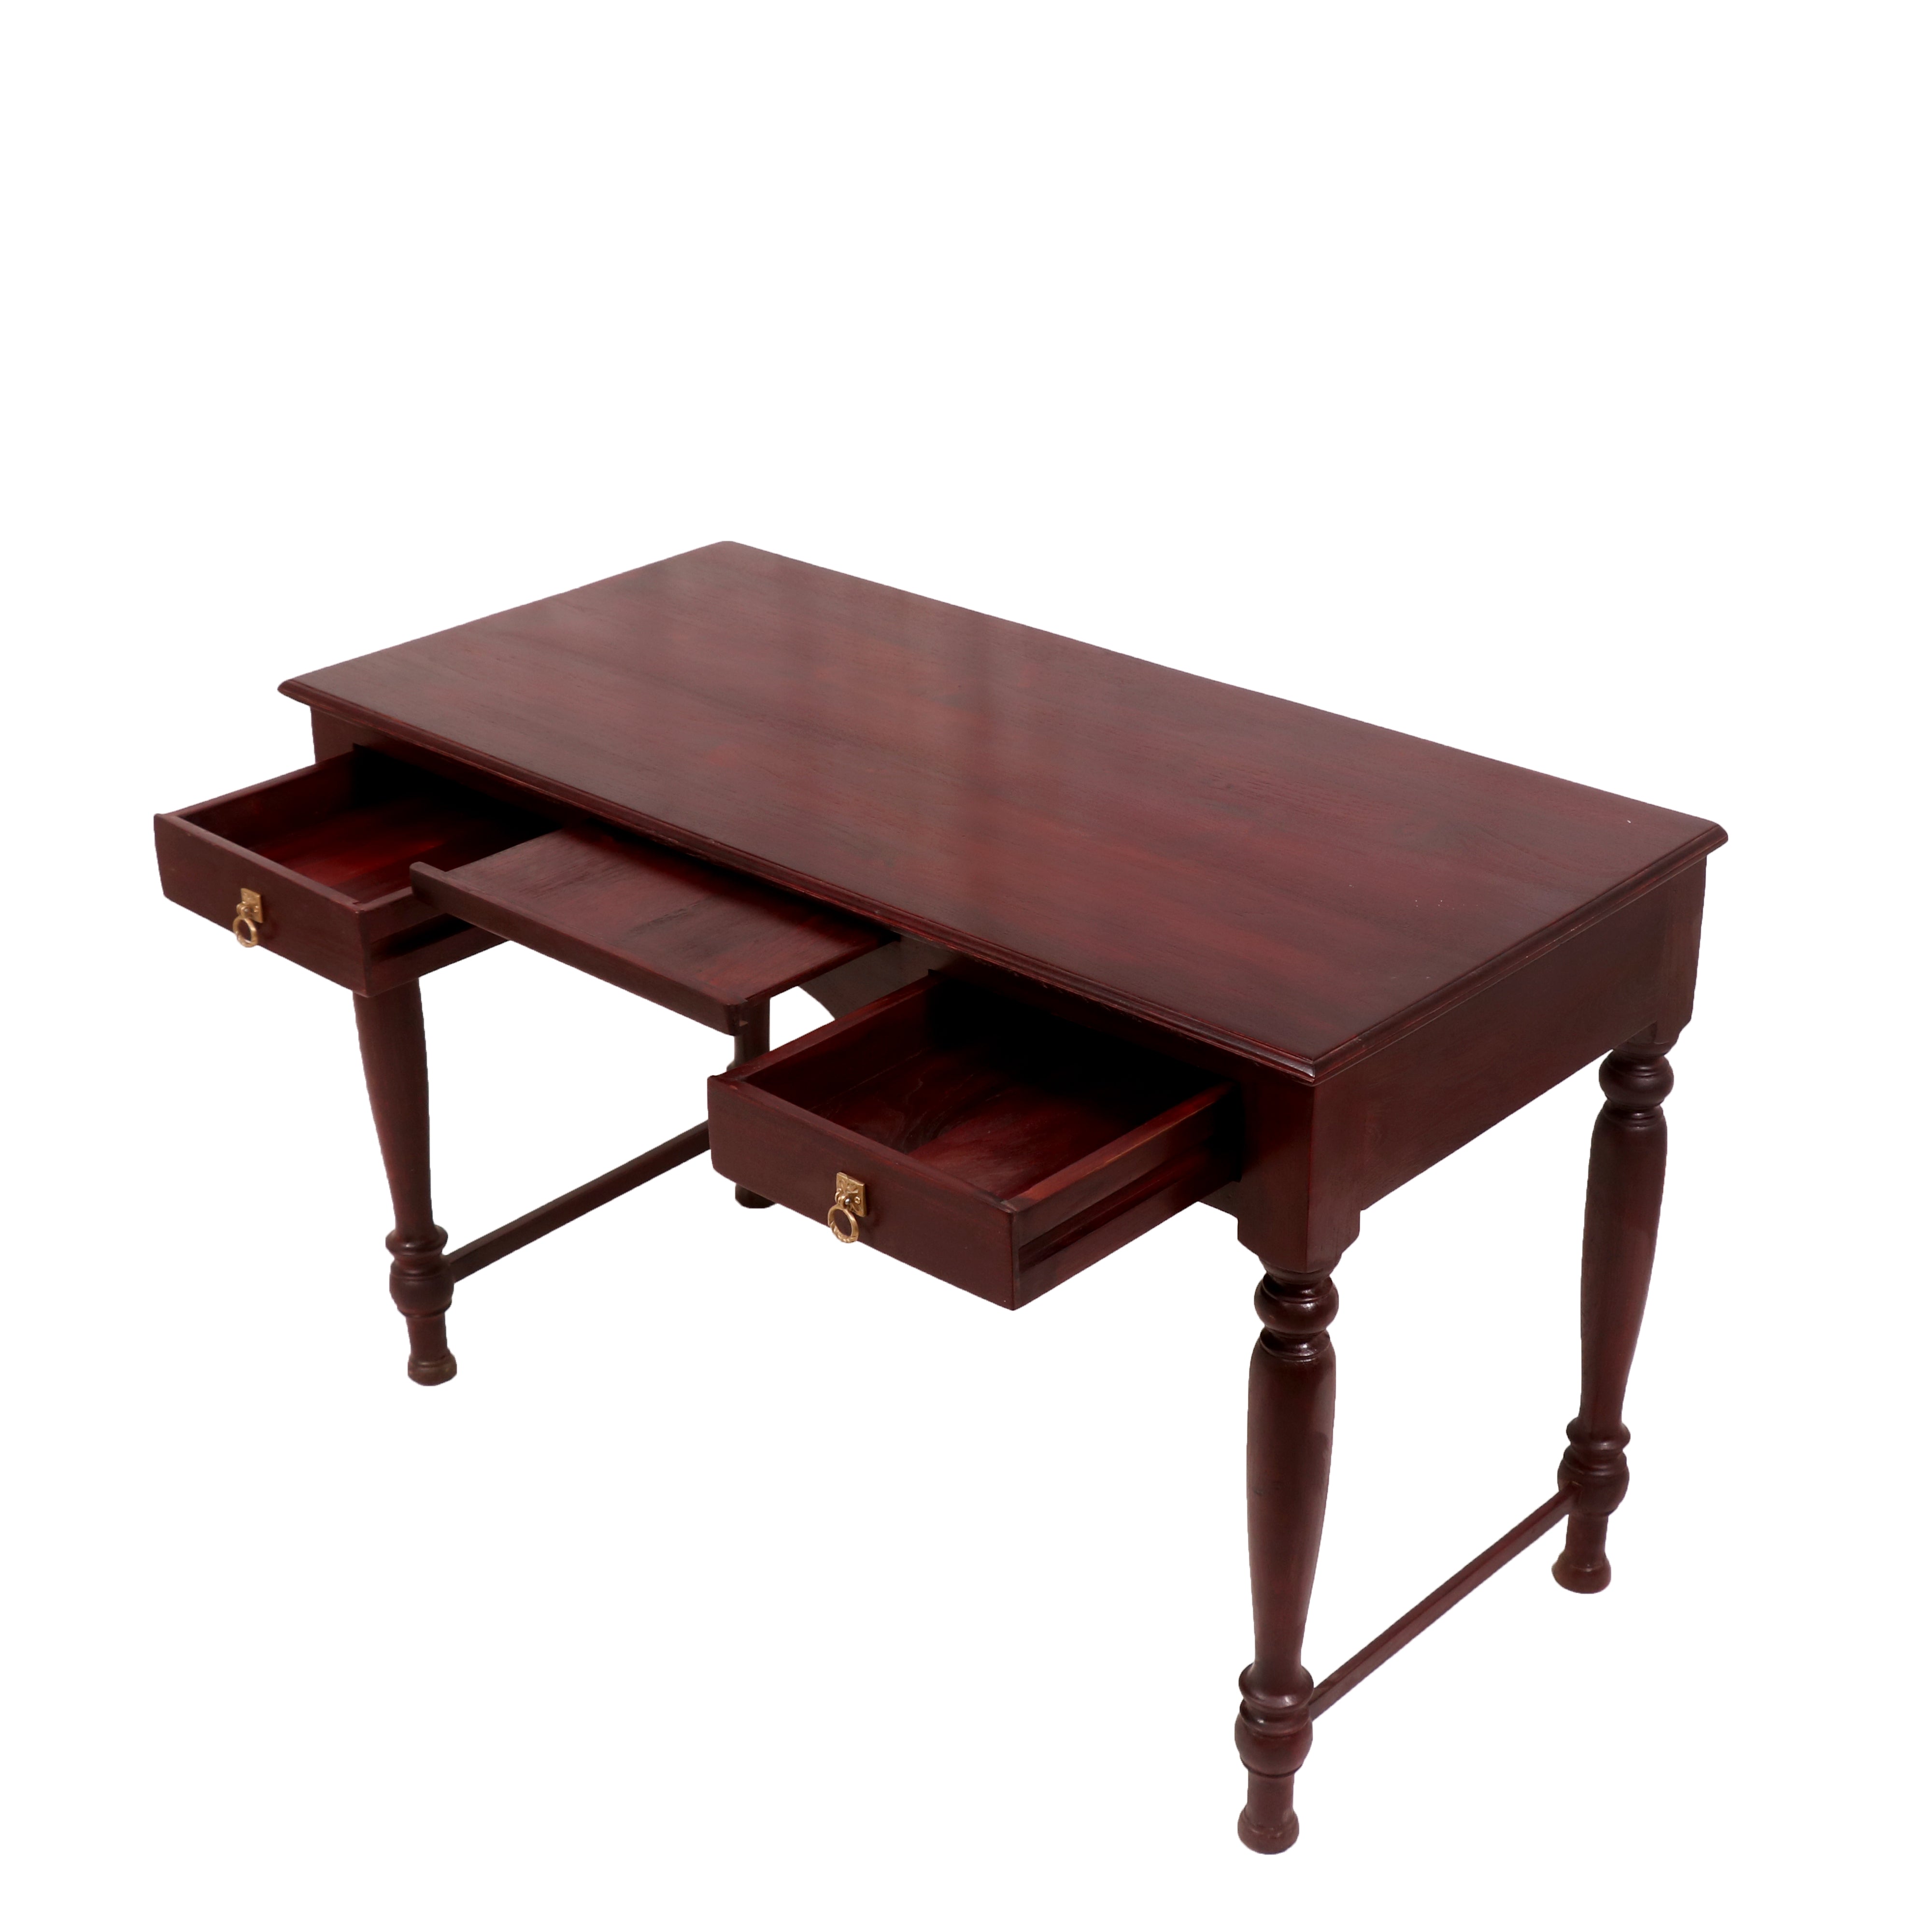 Rich Old School Sliding Table Study Table